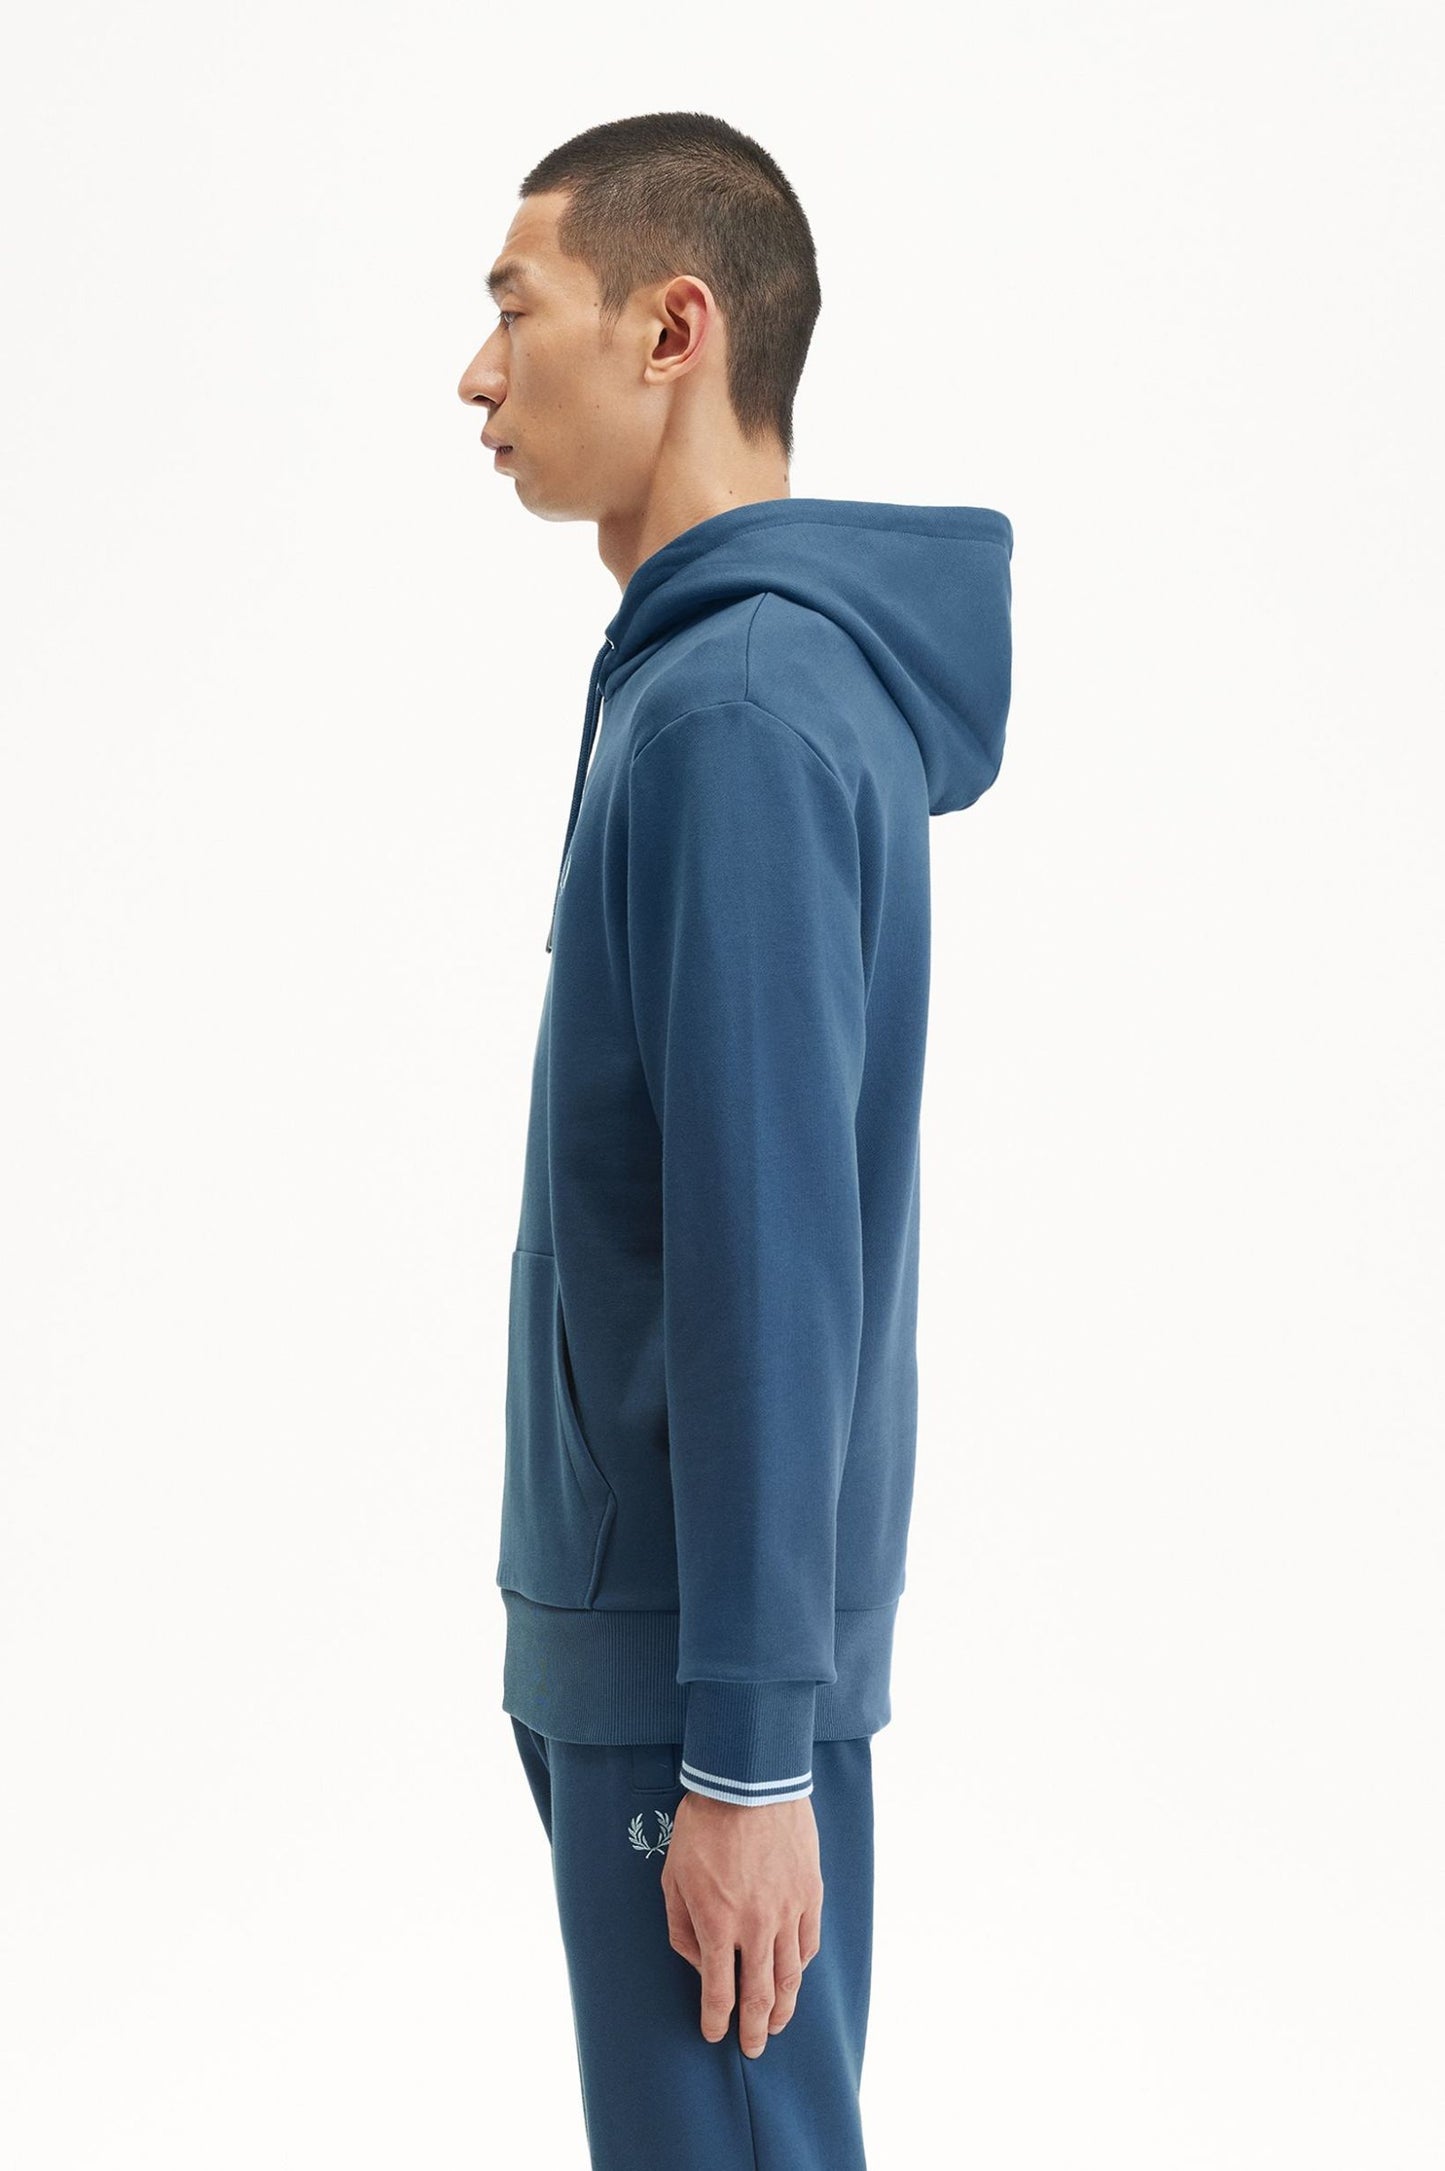 Fred PerryTipped Hooded Sweatshirt Midnight BLue / Light Ice